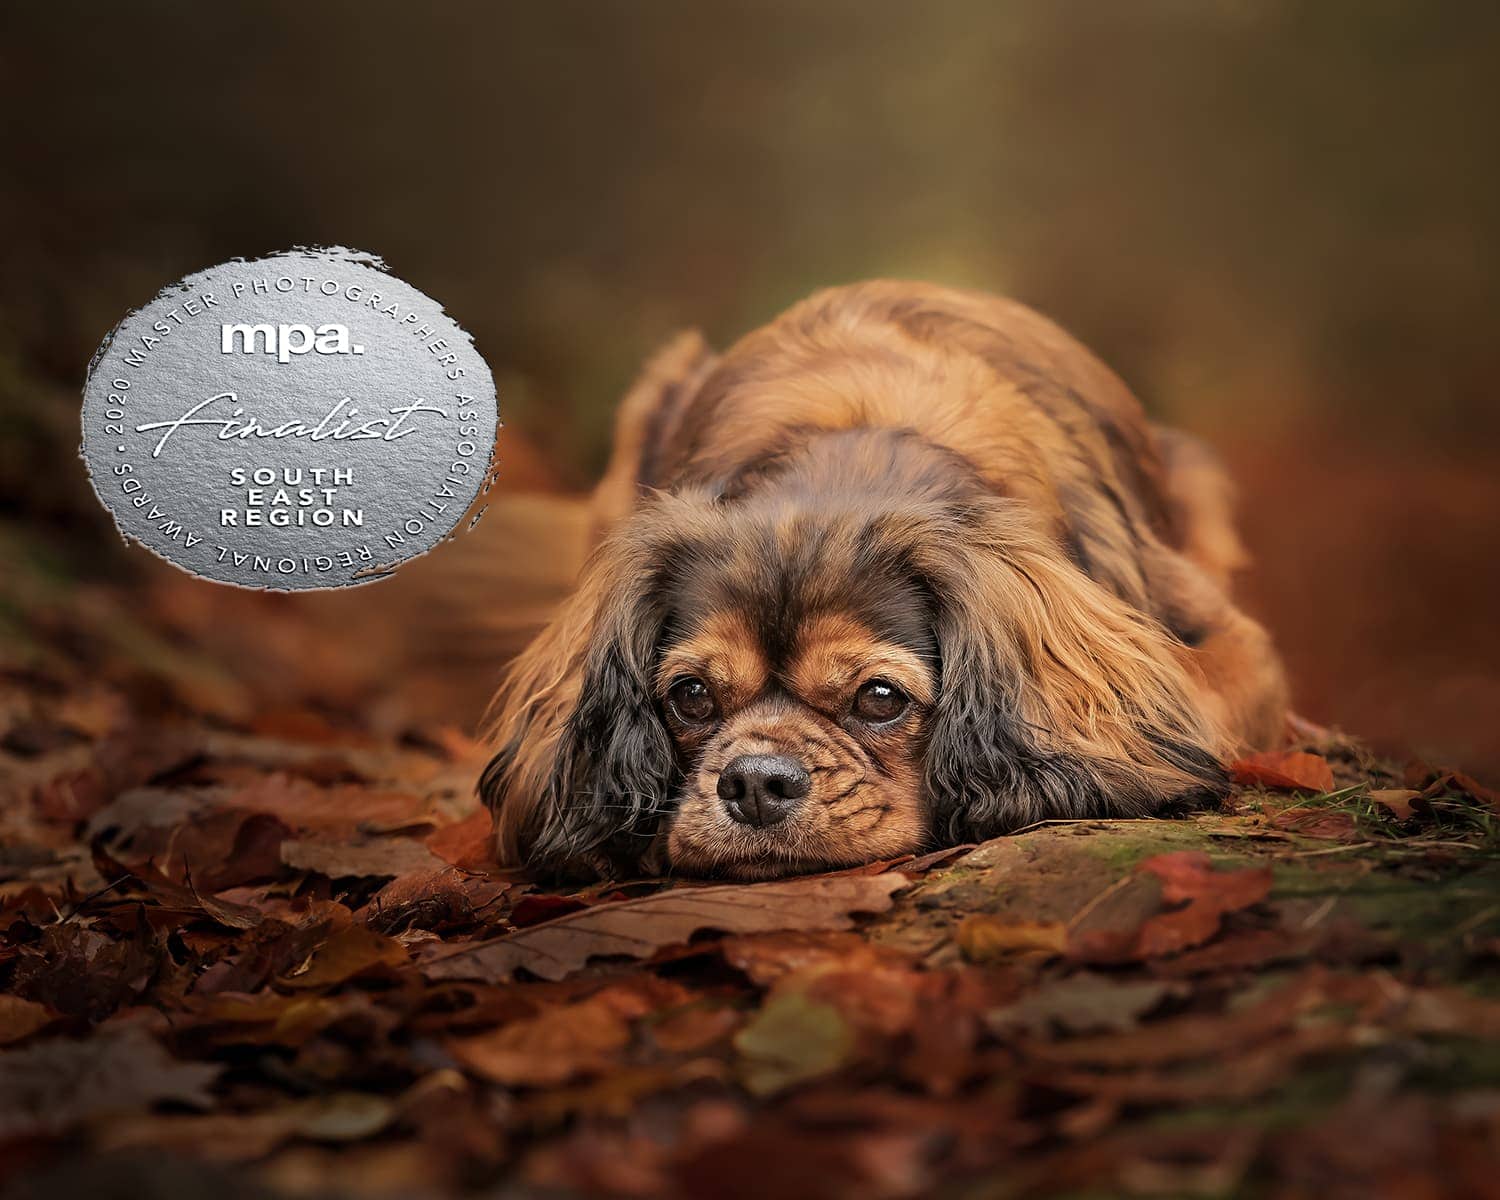 MPA Up and Coming Runner Up Finalist Pet Photographer of the Year – South East Region